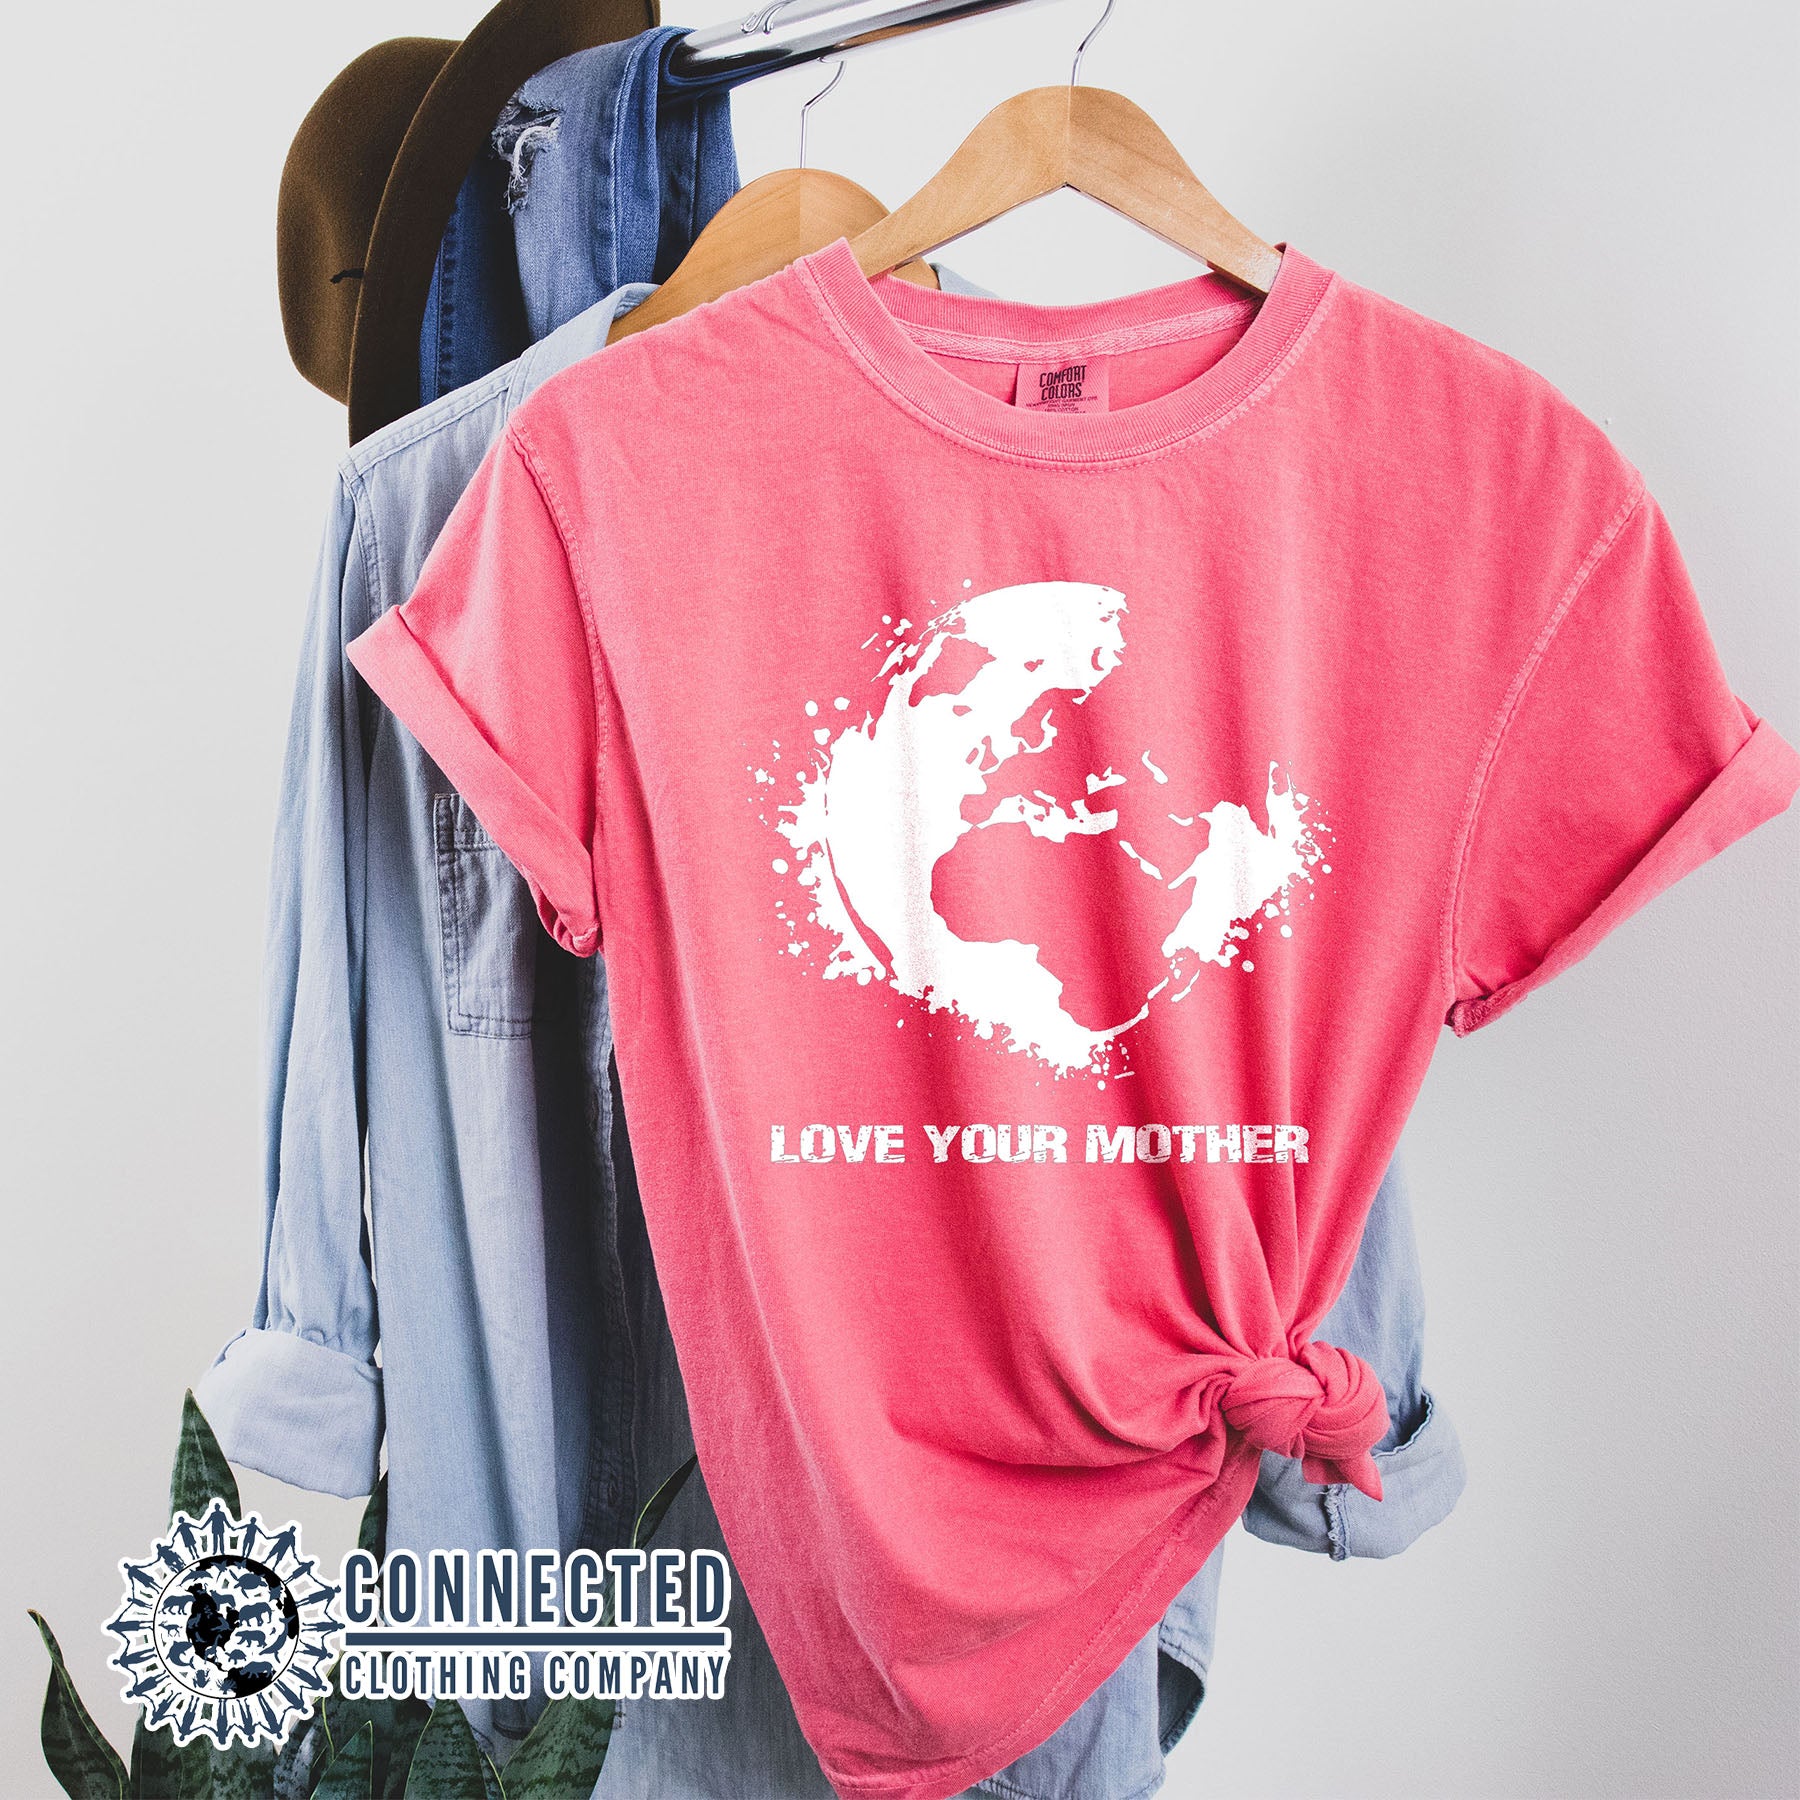 Love Your Mother Earth Short-Sleeve Tee - Connected Clothing Company - 10% of profits donated